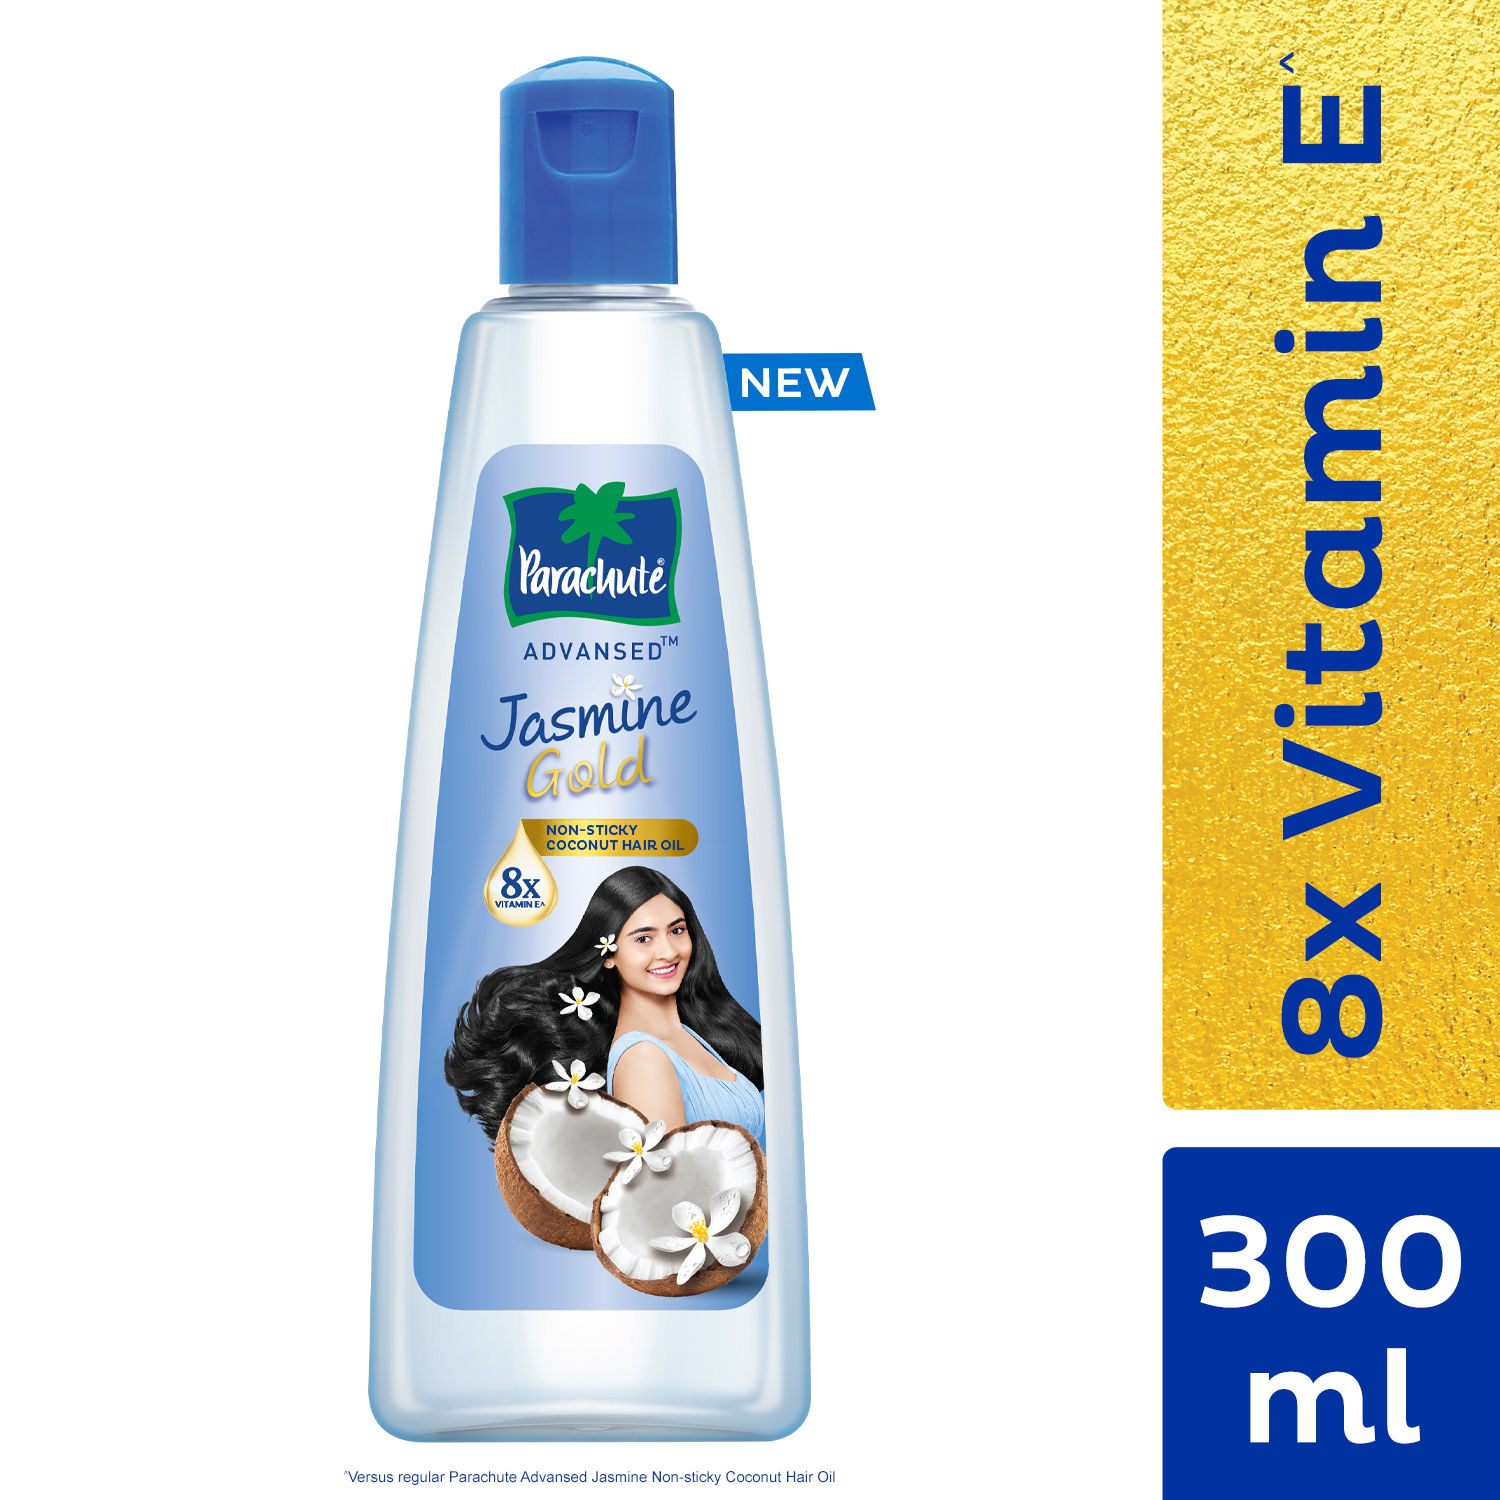 Buy Parachute Advansed Jasmine Gold Non-Sticky Coconut Hair Oil with 8x Vitamin E For Super Shiny Hair, 300ml - Purplle